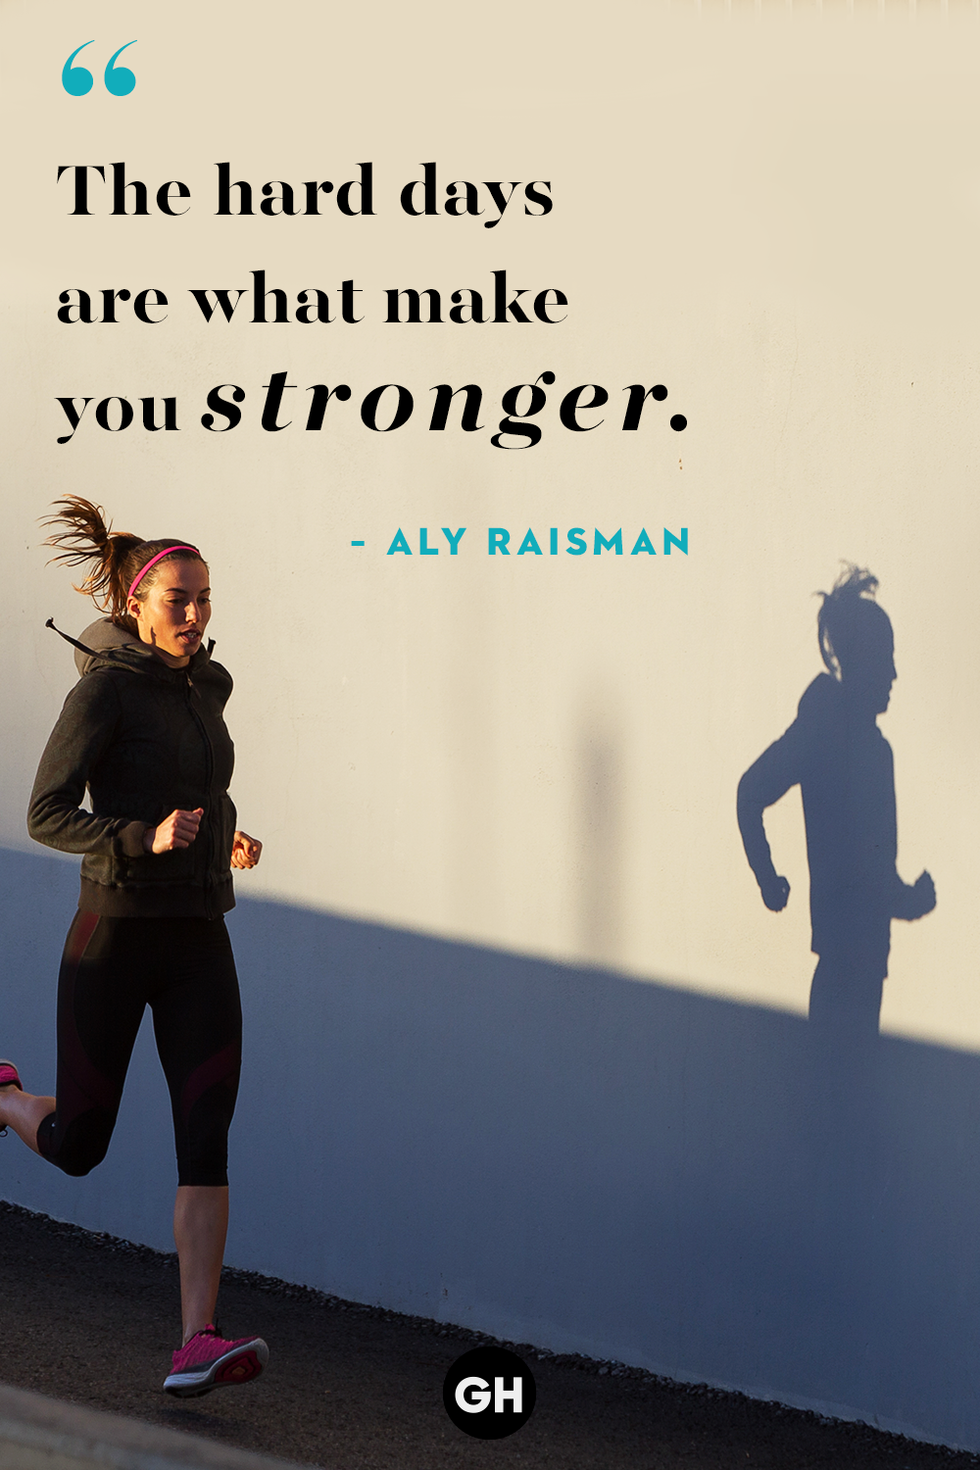 20 Inspirational Quotes To Get You Motivated For The Gym (Plus, 3